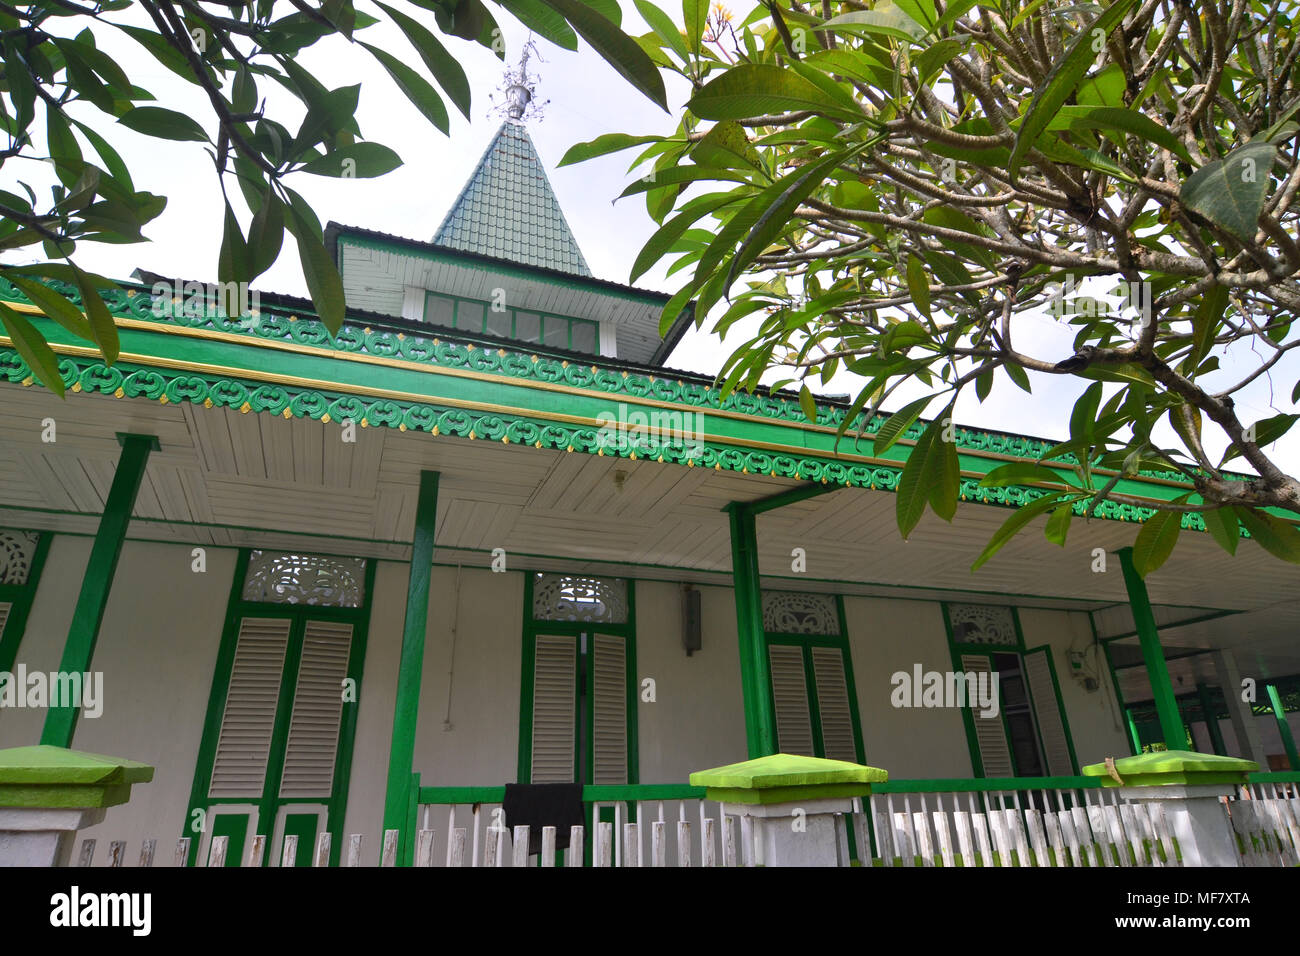 the traditional mosque built in 1625, is the second oldest mosque in South Kalimantan, Indonesia Stock Photo